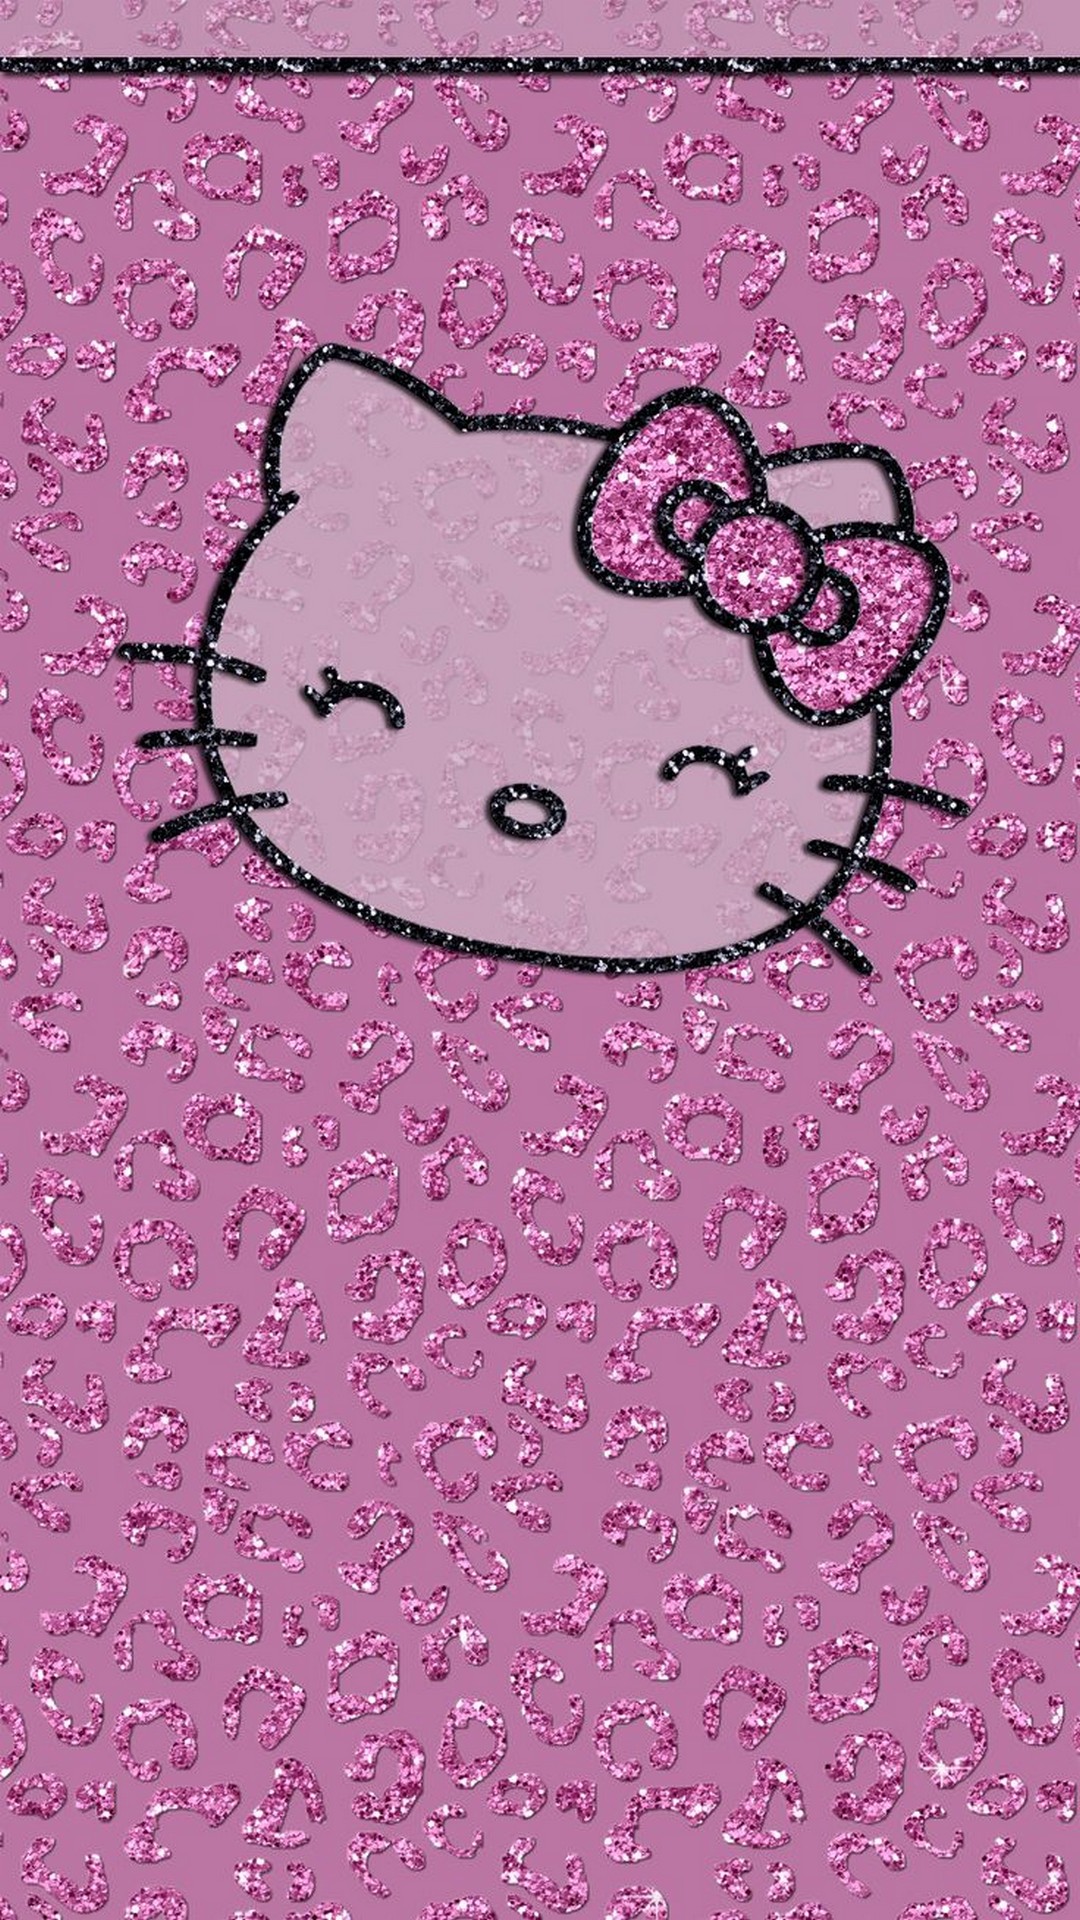 Wallpaper Hello Kitty Pictures iPhone with image resolution 1080x1920 pixel. You can use this wallpaper as background for your desktop Computer Screensavers, Android or iPhone smartphones